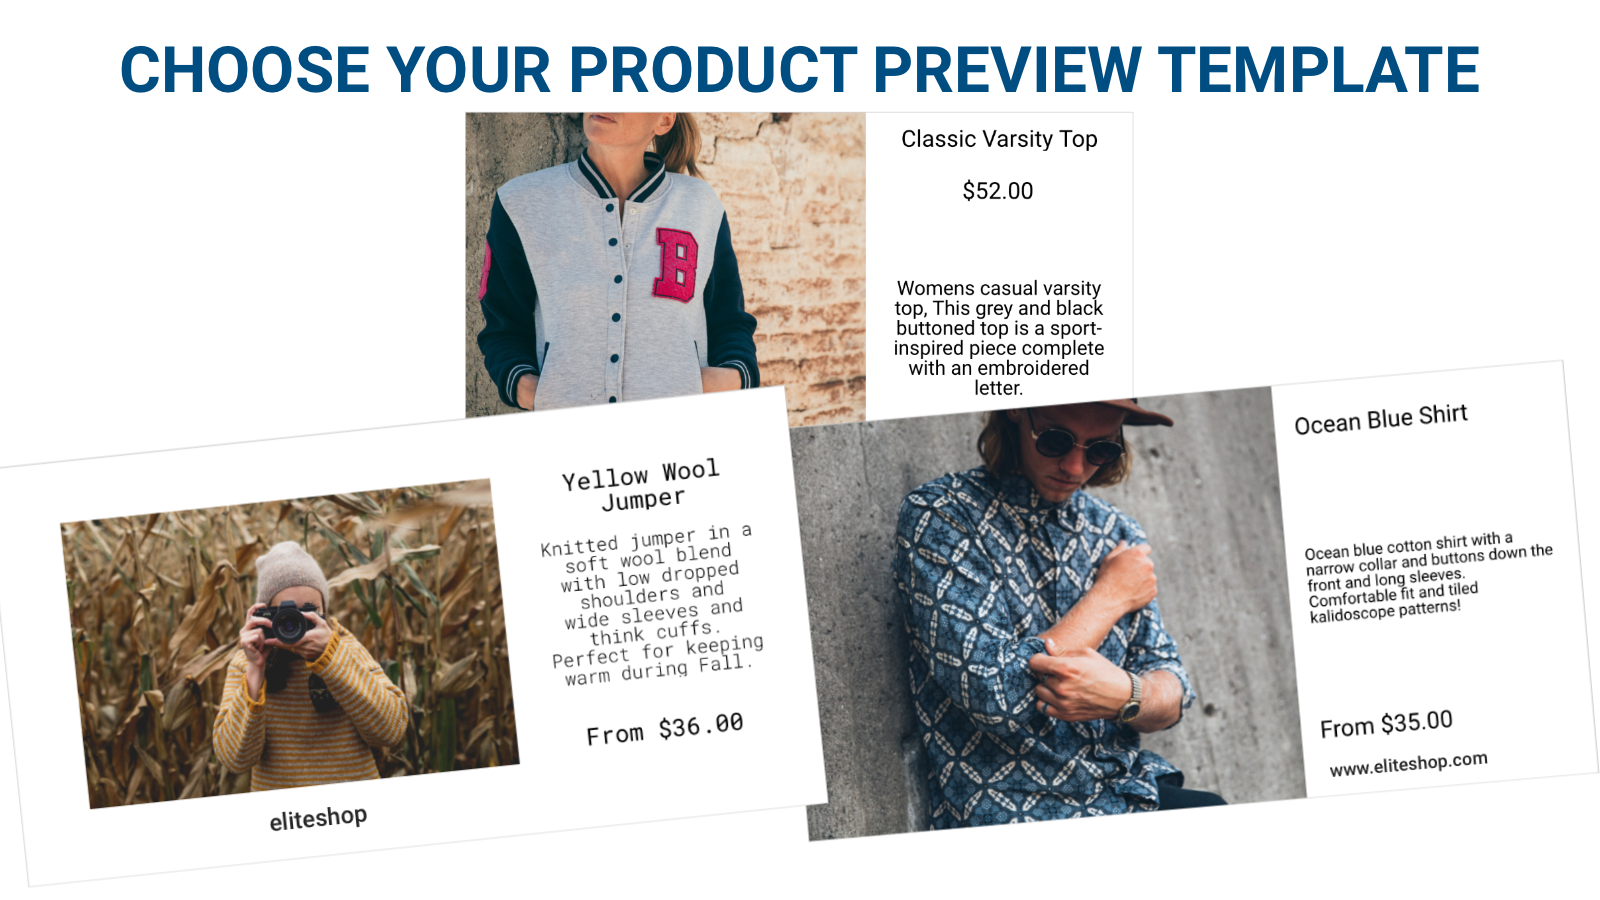 Choose your product preview template 